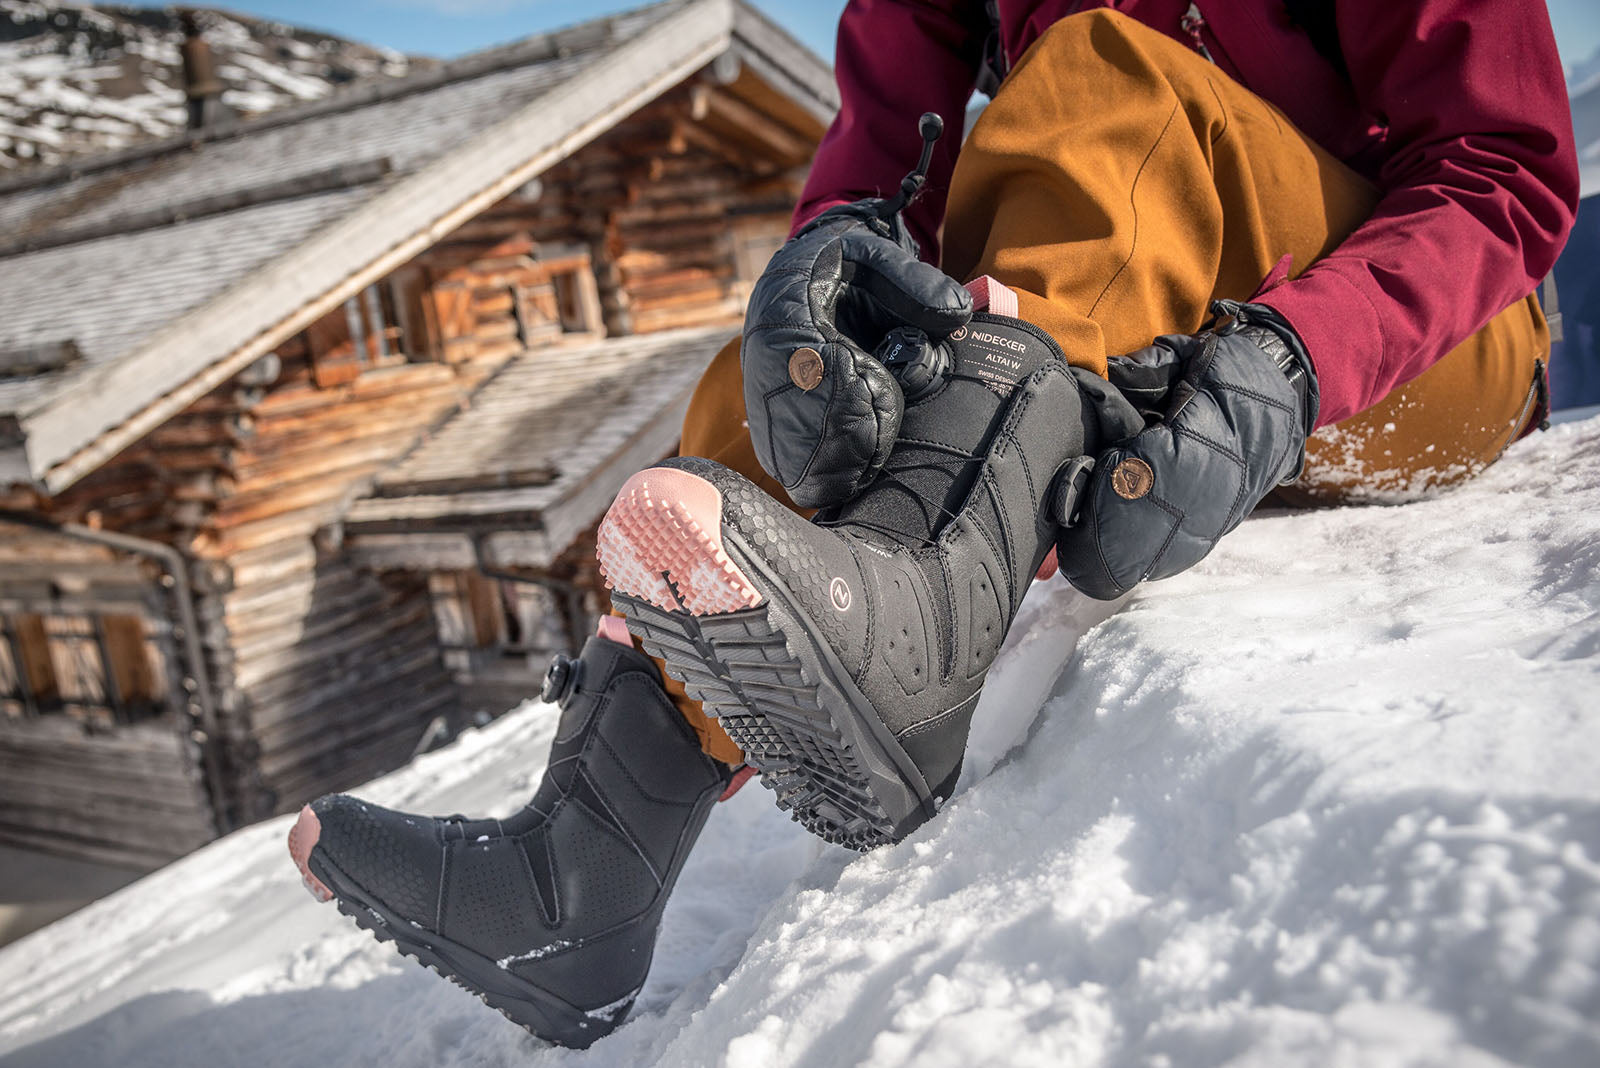 Mad Dog's Ski & Board carry a wide selection of snowboard boots